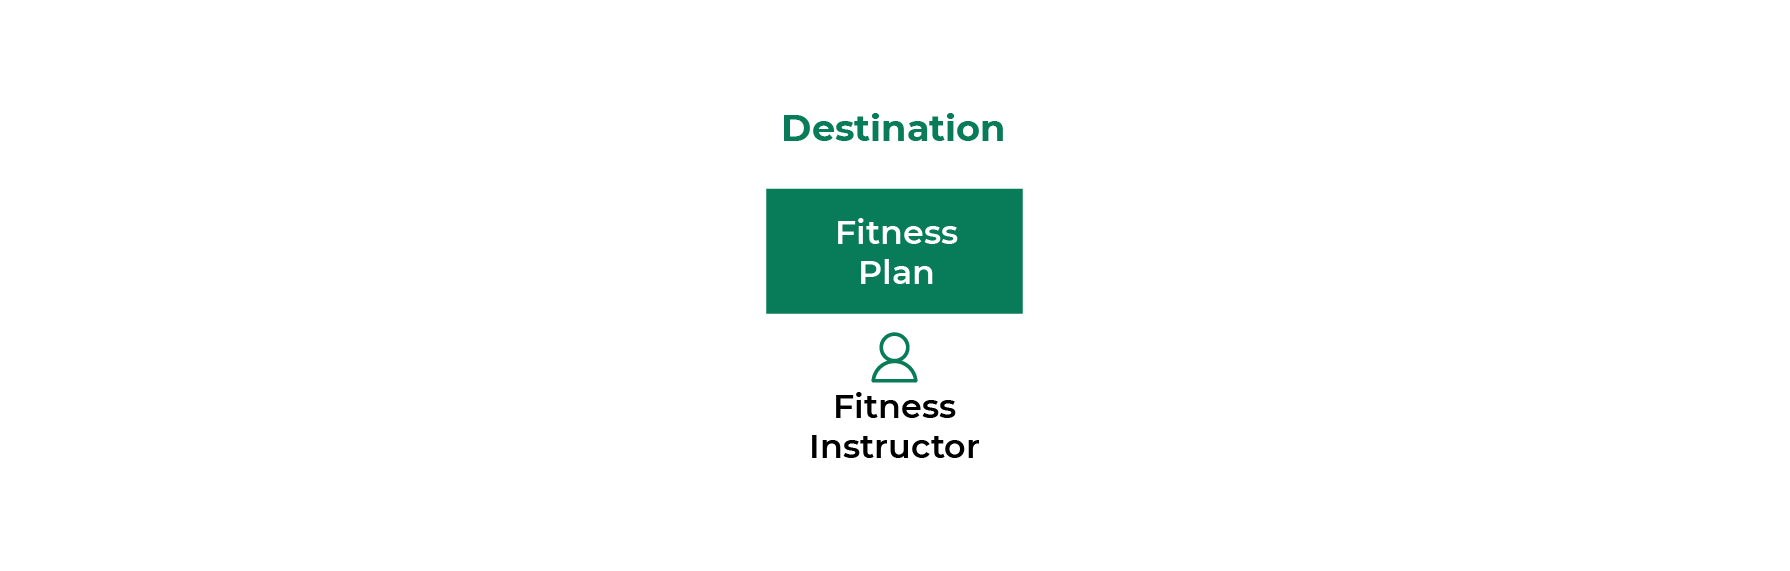 A picture shows the destination rectangle that says “fitness plan”. Below it there’s an icon representing a person that is titled “fitness instructor”.